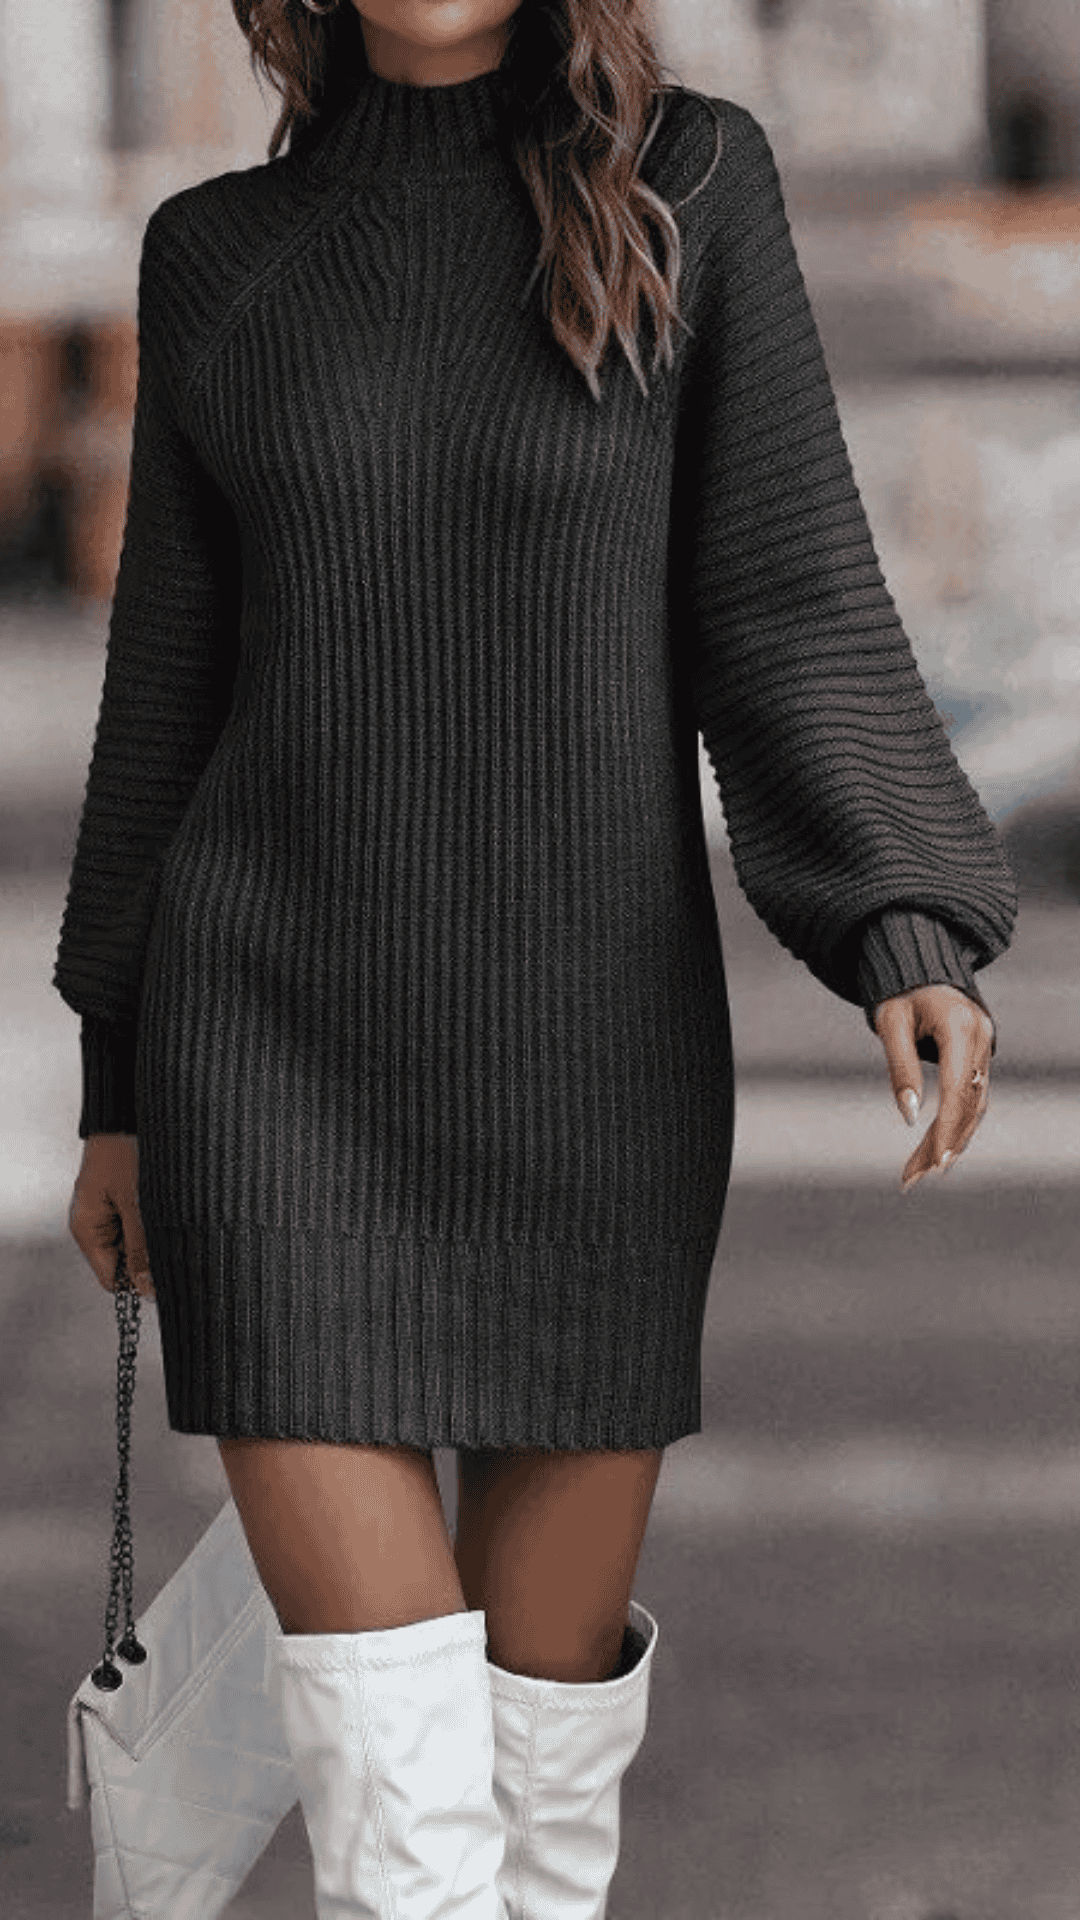 Vintage Knitted Dress Chic Turtleneck Sweater Dress for Women